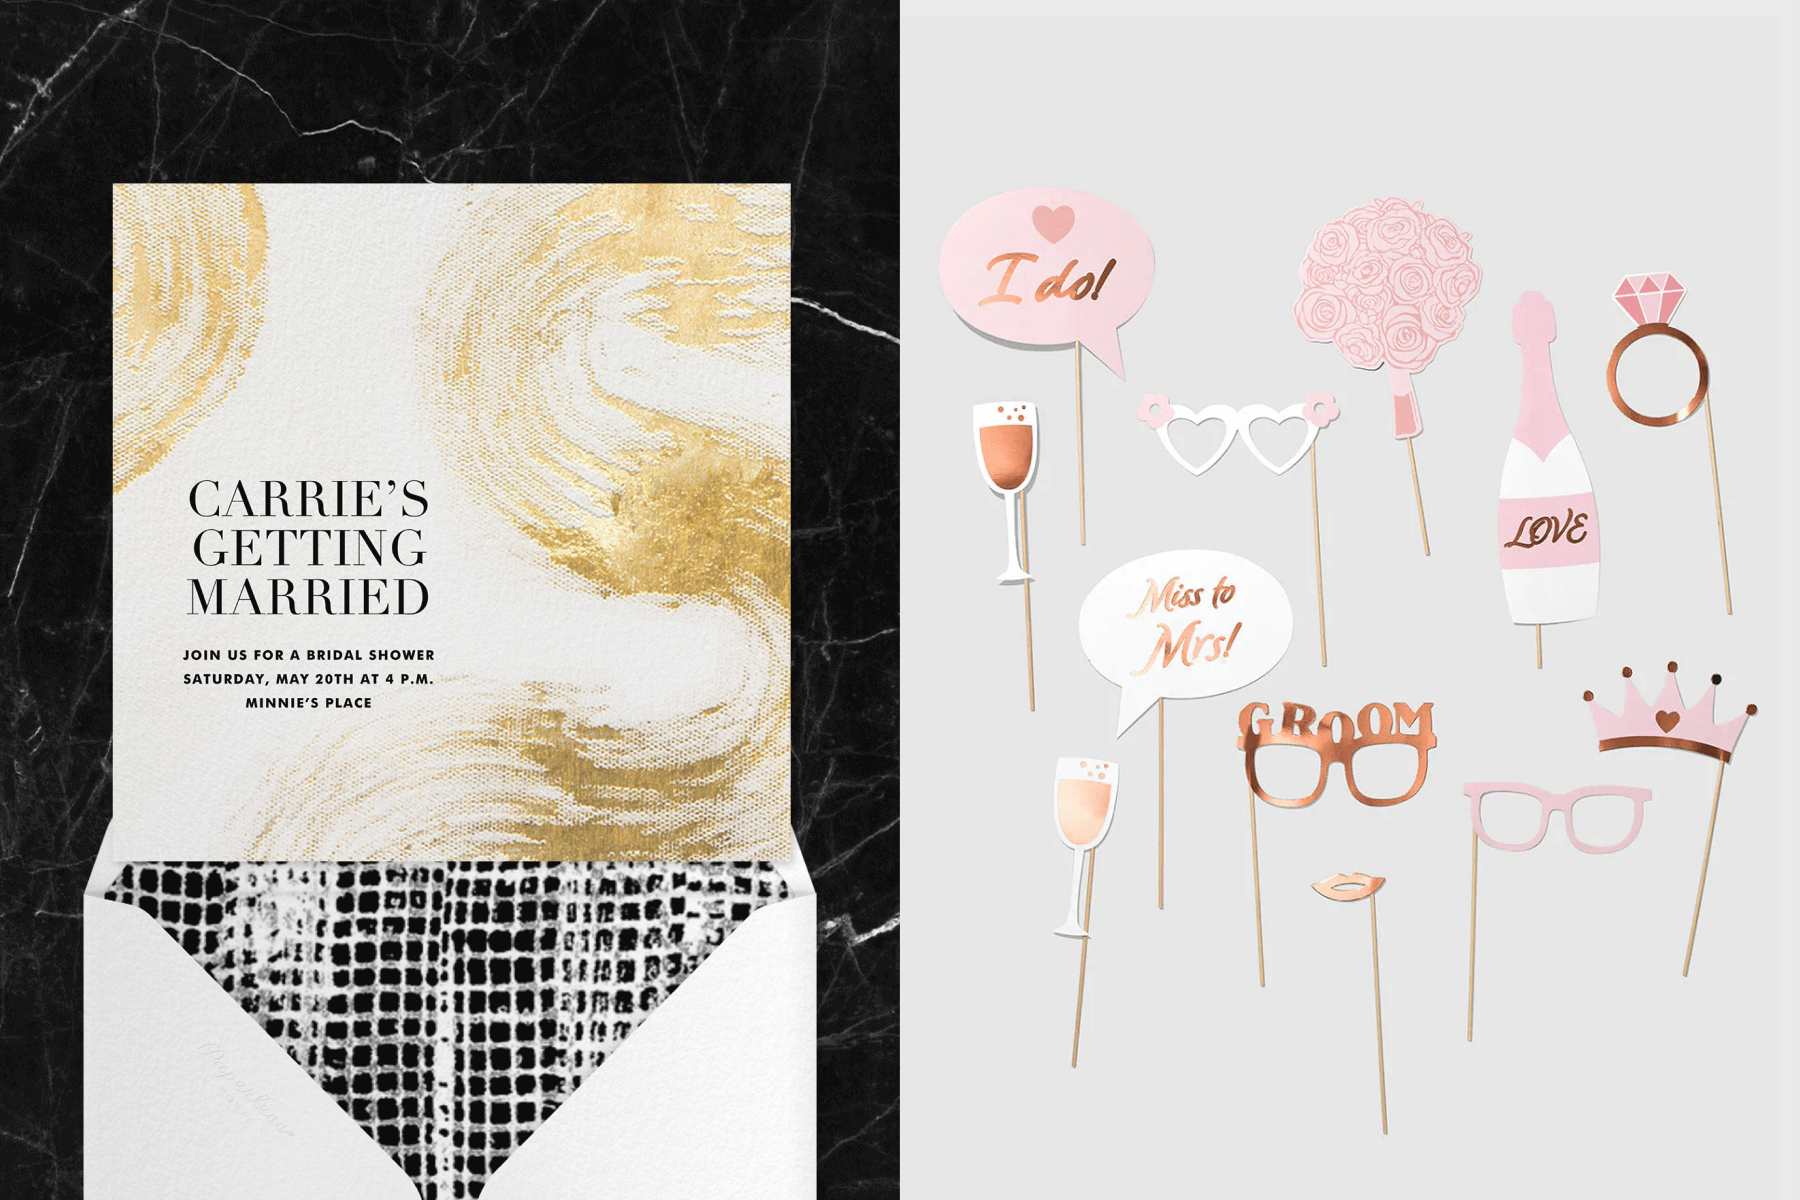 left: A white bridal shower invitation with gold abstract brushstrokes. Right: Pink and rose gold wedding-themed photo booth props, including eyeglasses, Champagne bottle, diamond ring, and more.